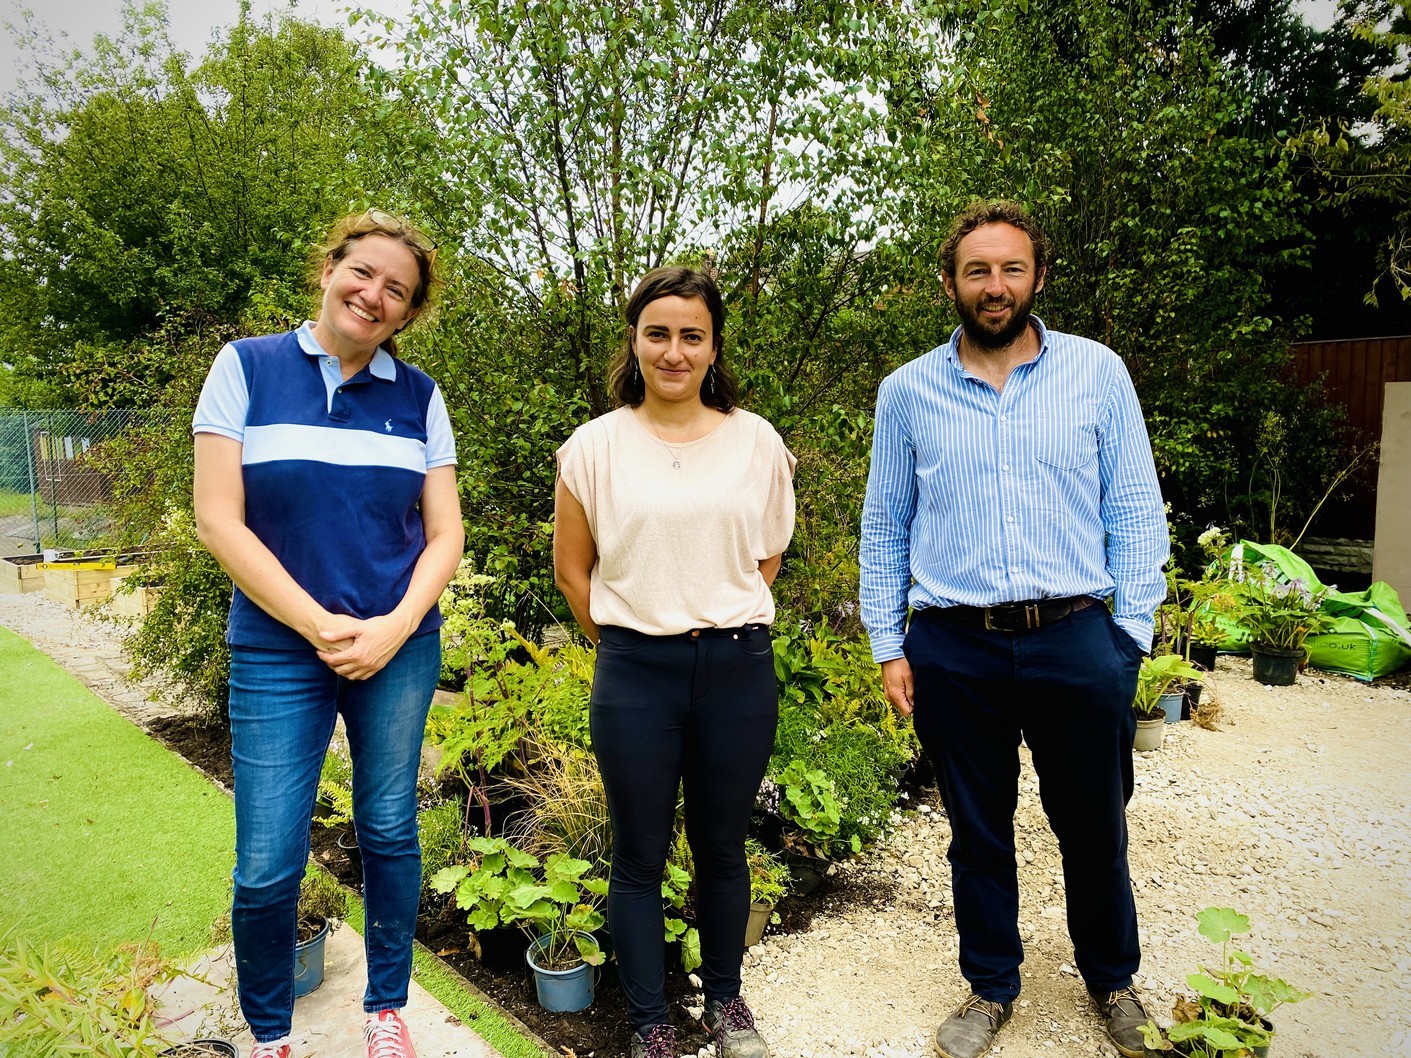 Relocating the garden to the Lower School over the summer - Head Iona Carmody, Designer Anca Panait and Head of Landstruction David Binks.